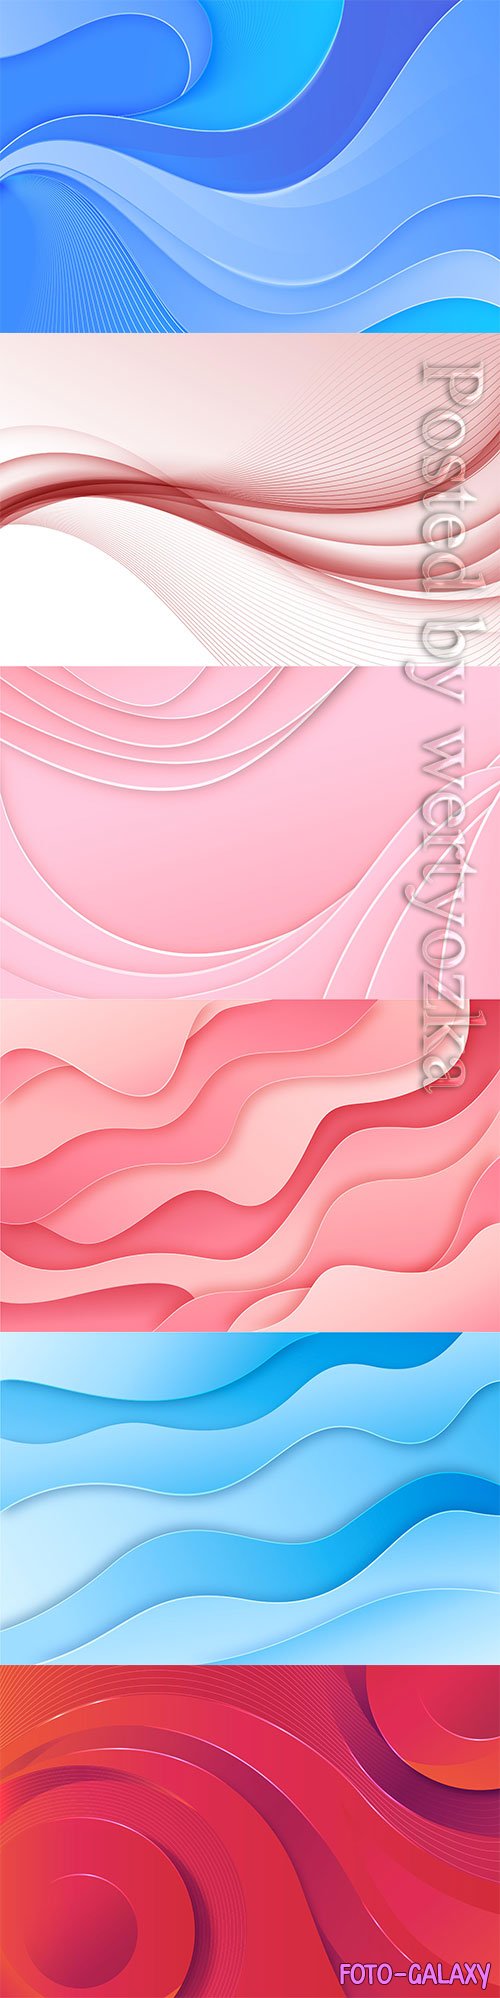 Colorful waves vector backgrounds with abstract paper